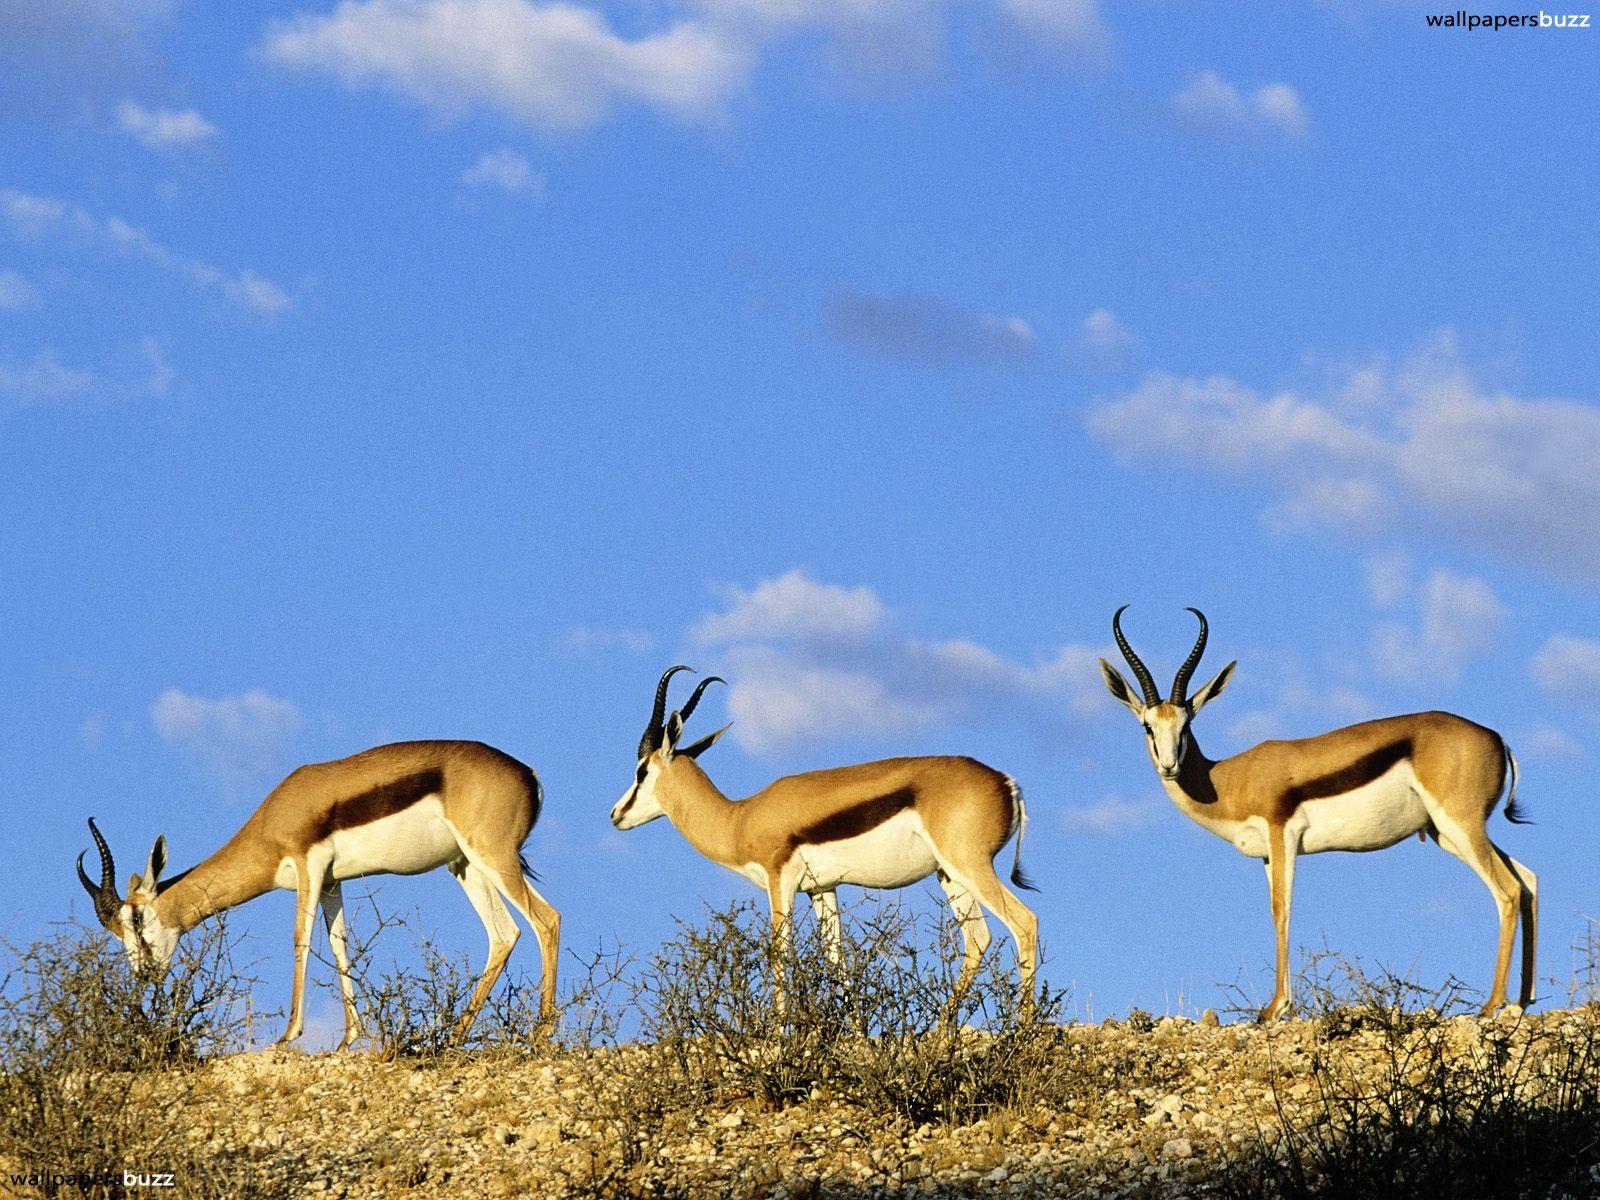 Springboks in the mountains HD Wallpaper